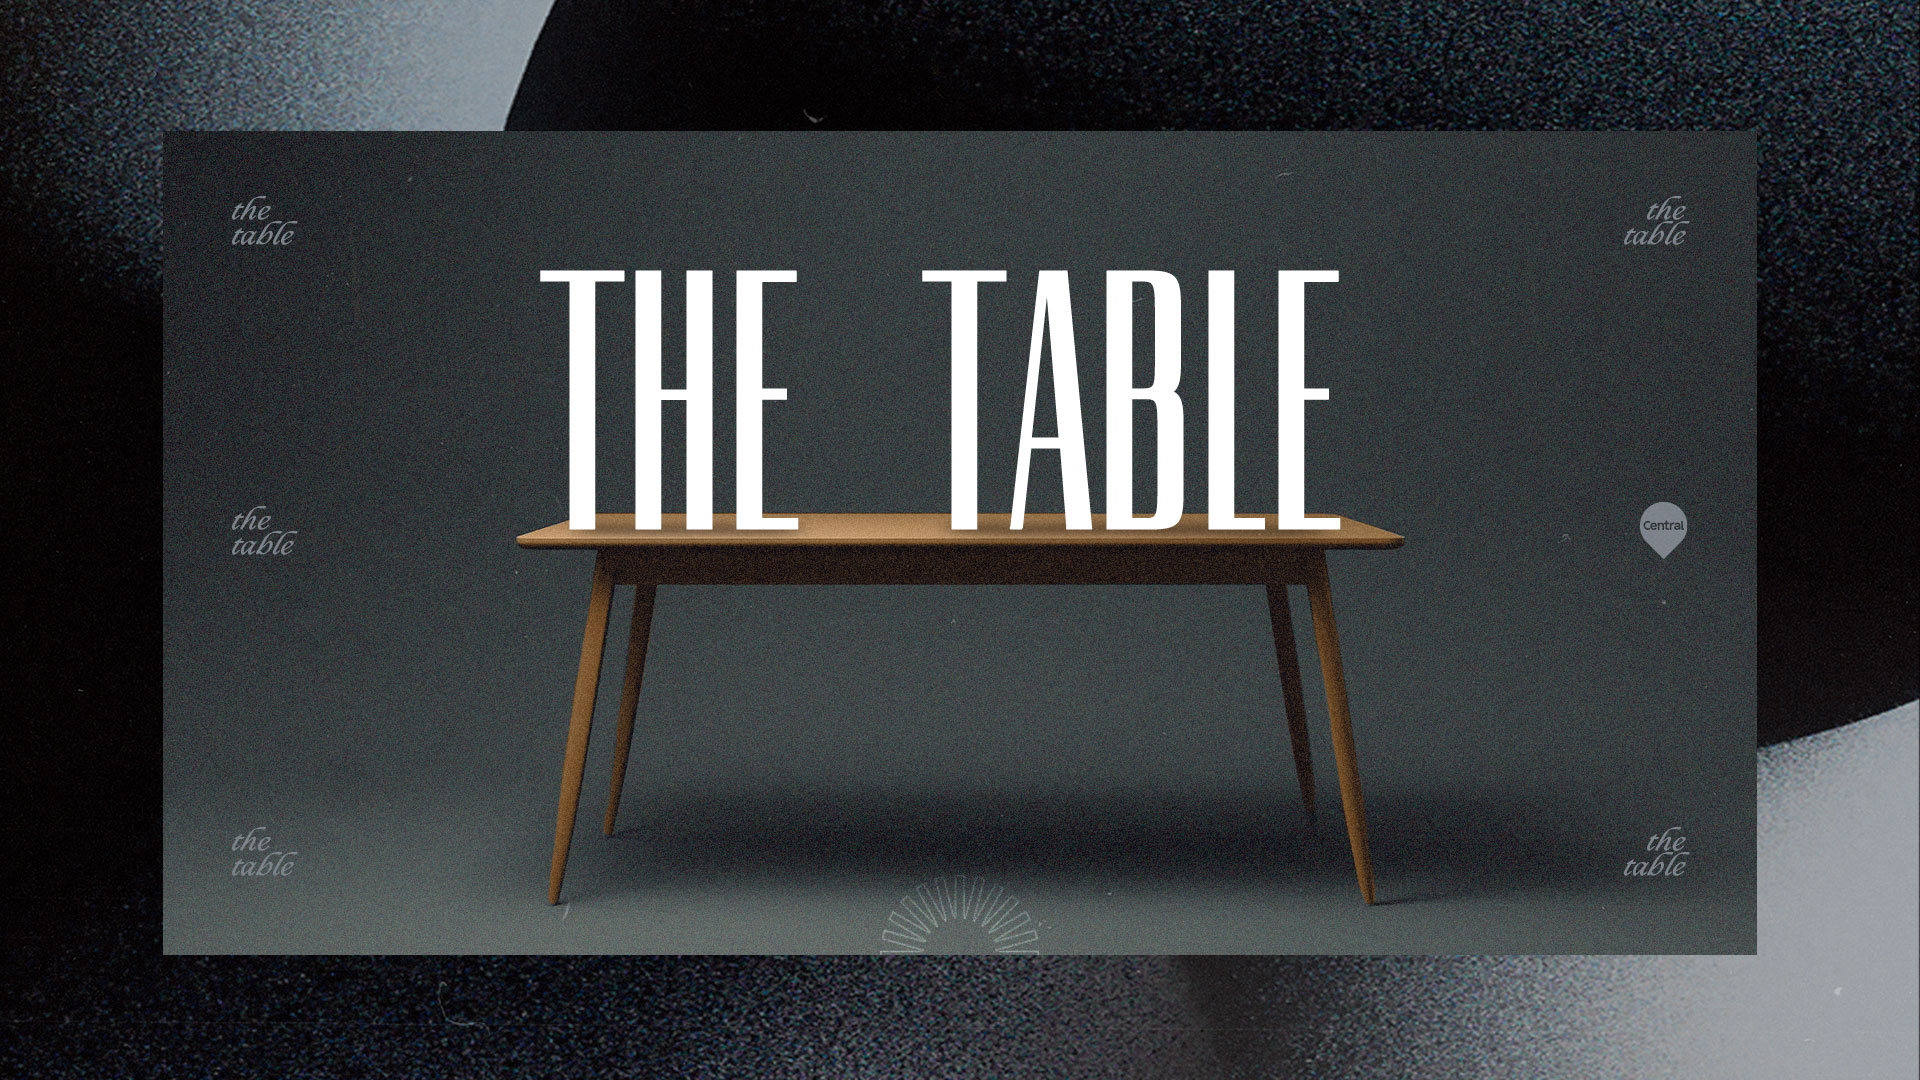   THE TABLE